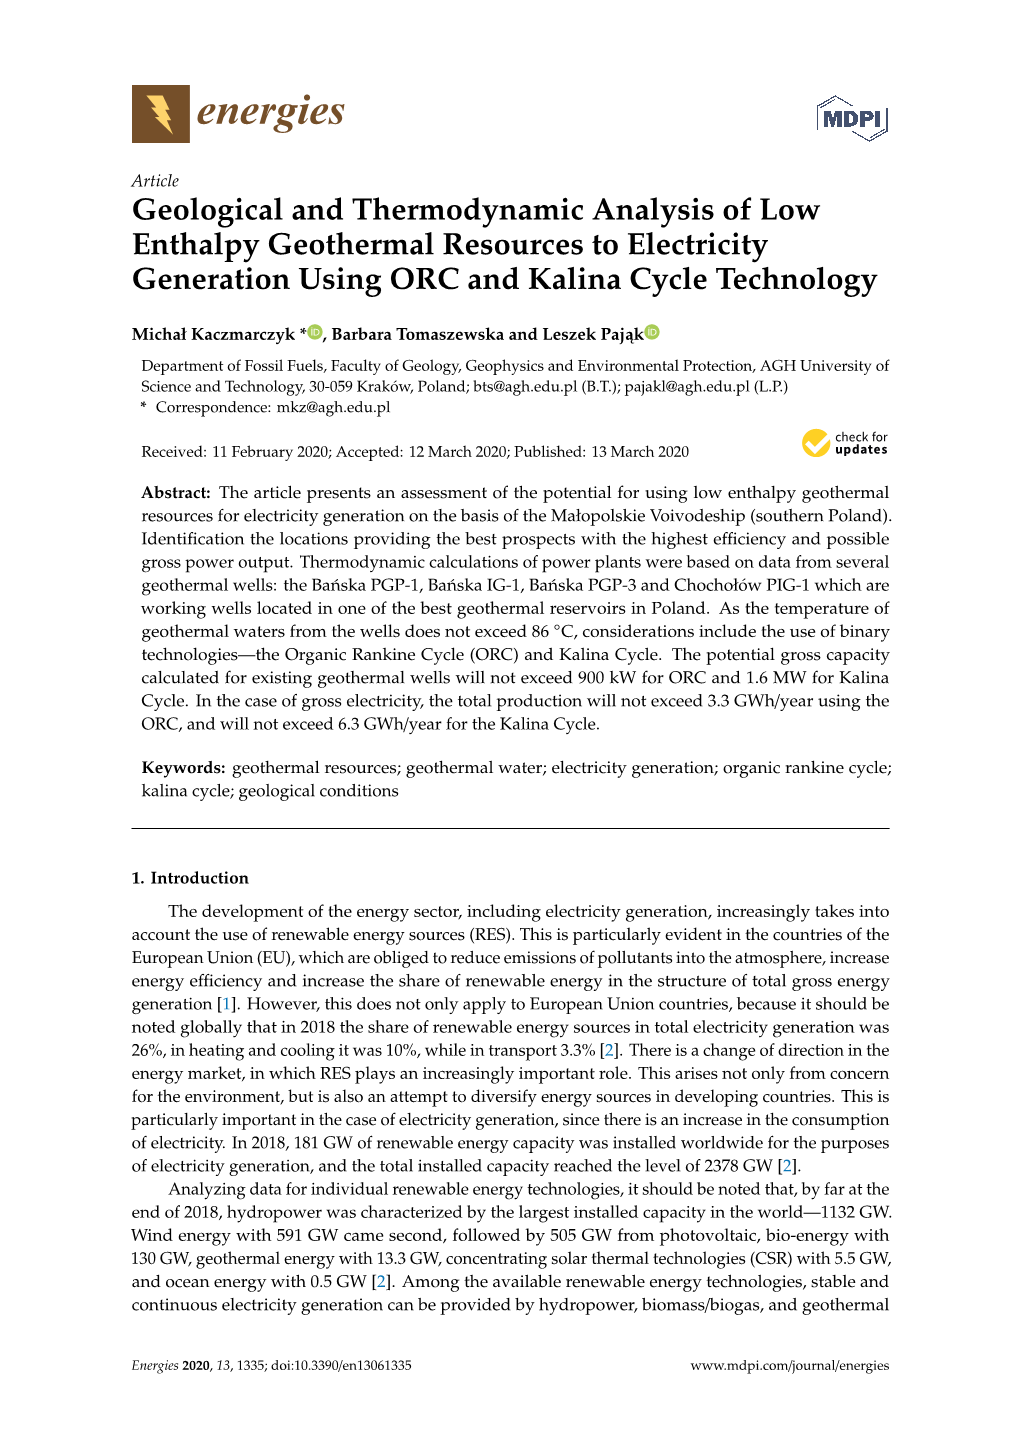 Geological and Thermodynamic Analysis of Low Enthalpy Geothermal Resources to Electricity Generation Using ORC and Kalina Cycle Technology